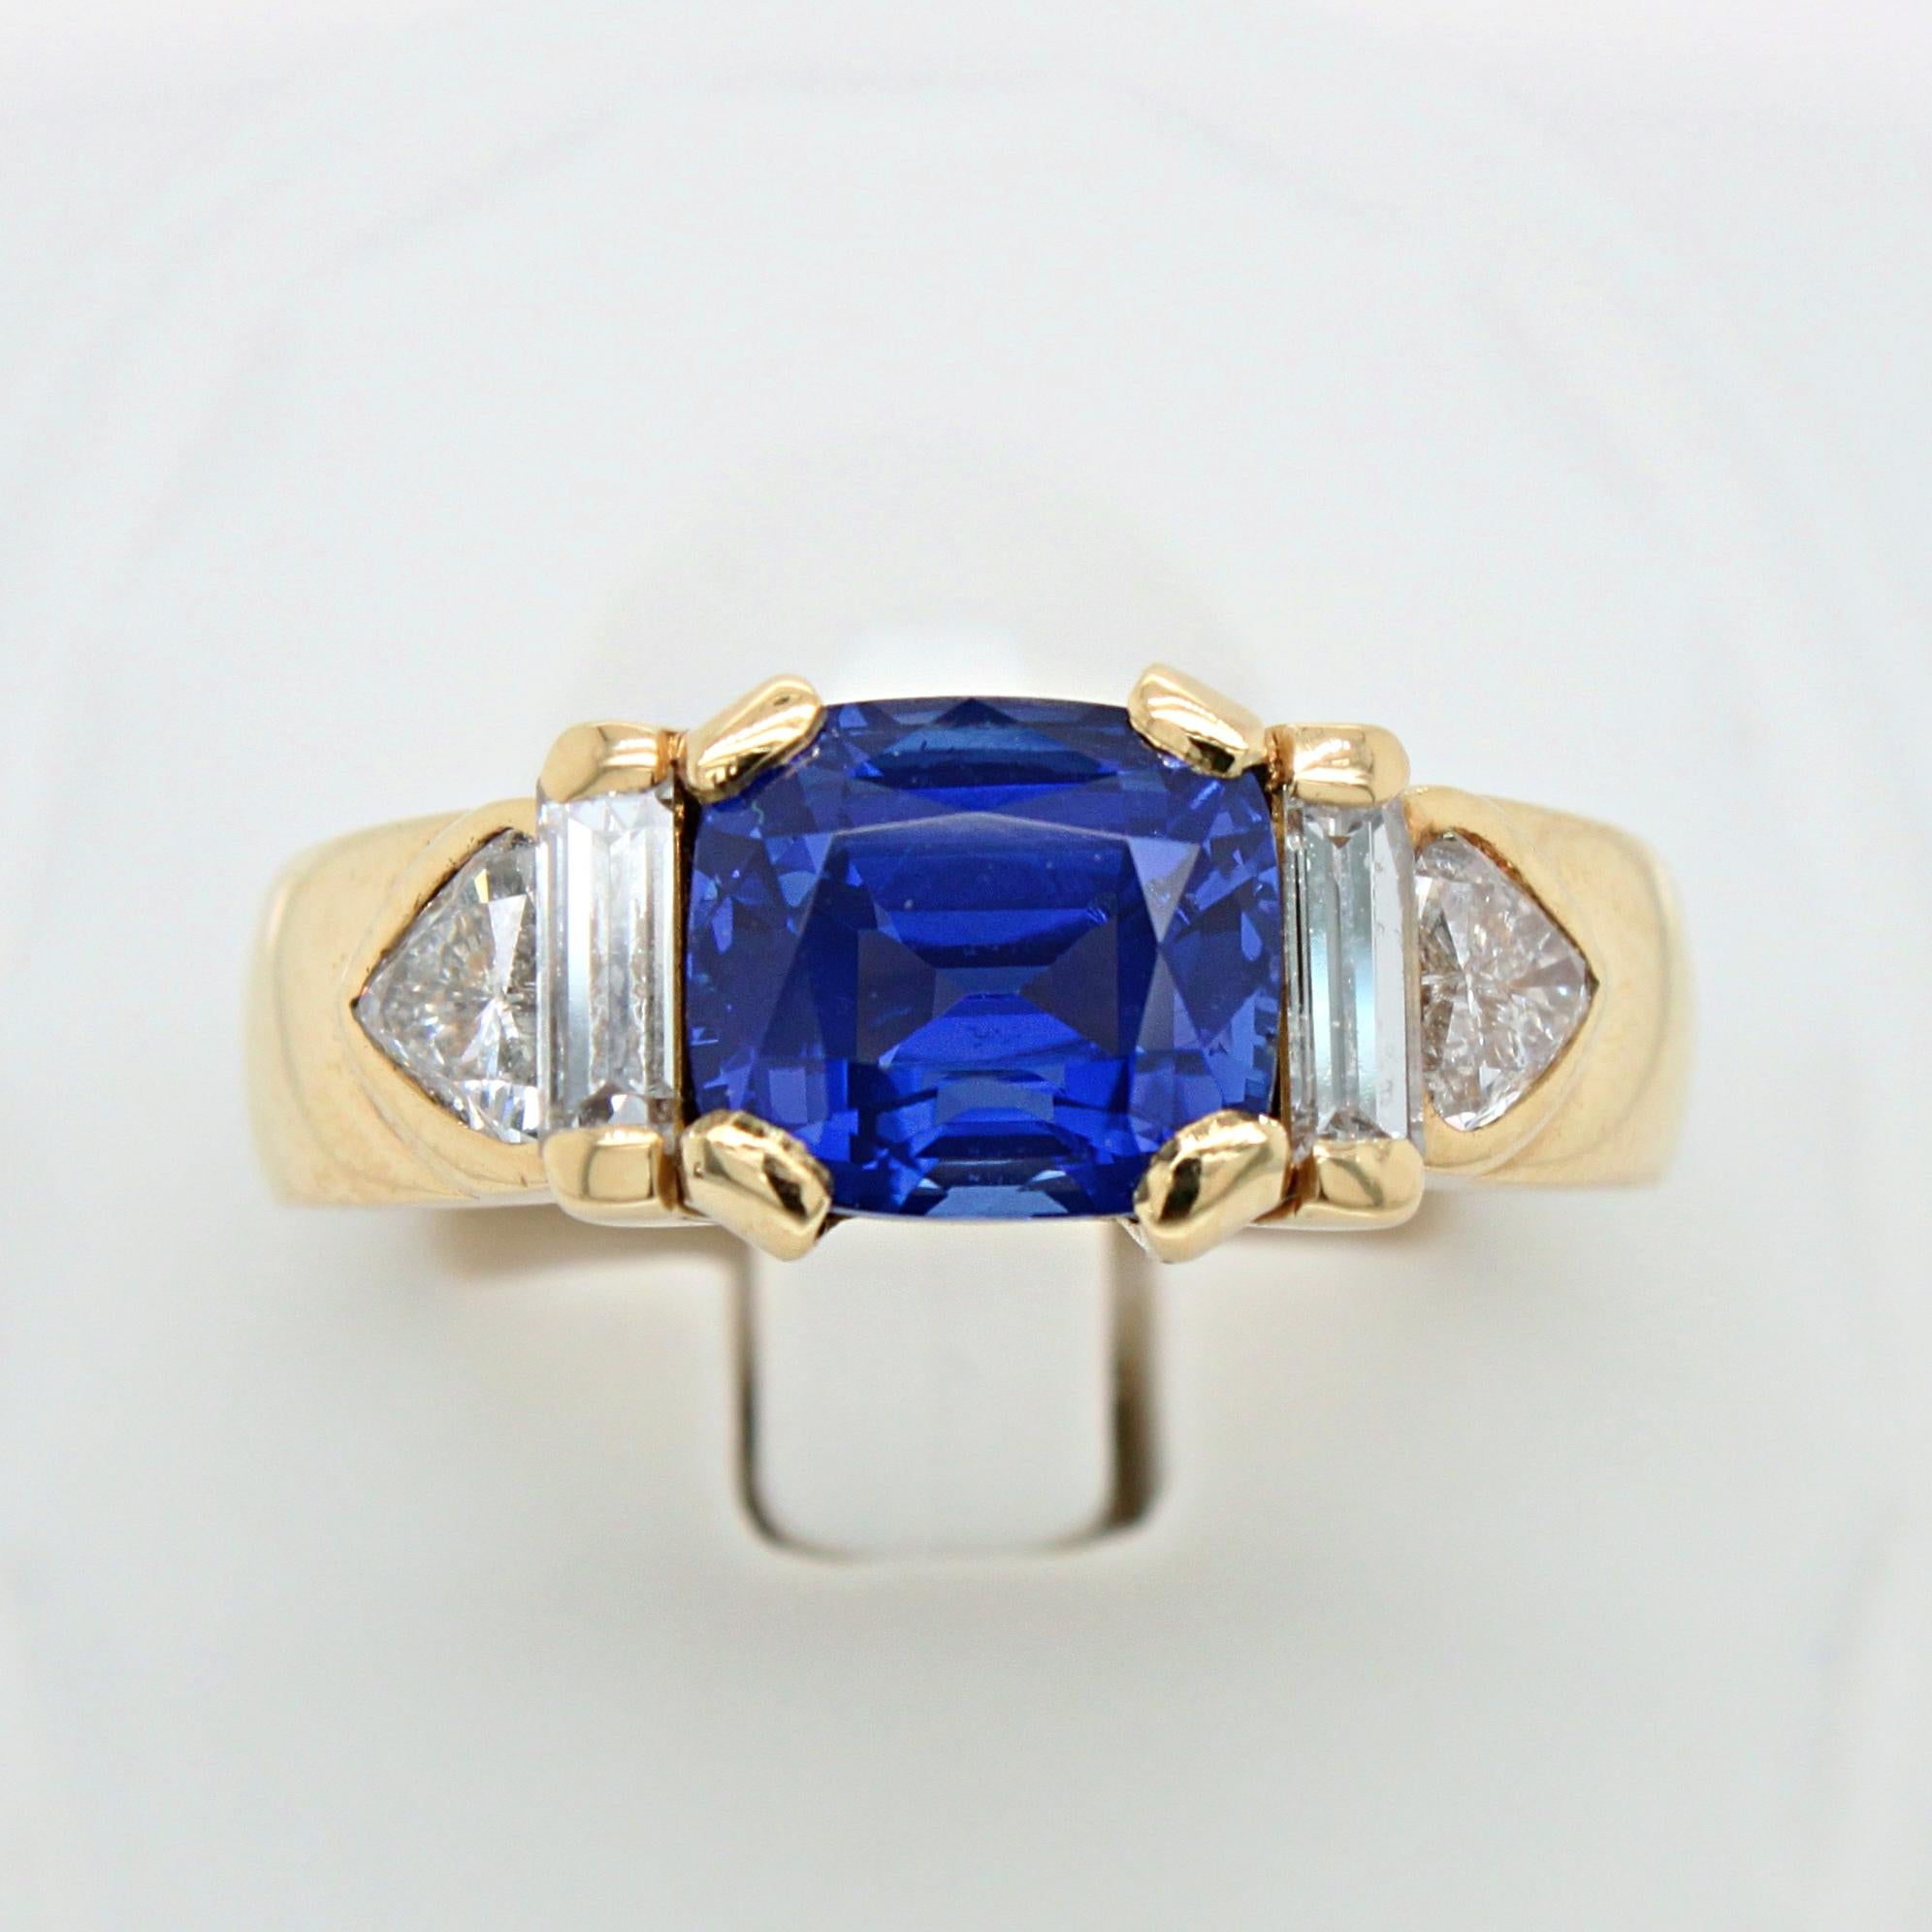 A beautiful Kashmir sapphire and diamond ring by Kern. The sapphire weighs 3.36 carats and is a natural (not heated) Kashmir sapphire. It has a striking deep cornflower blue colour and is a very clean gemstones with only minute inclusions (visible